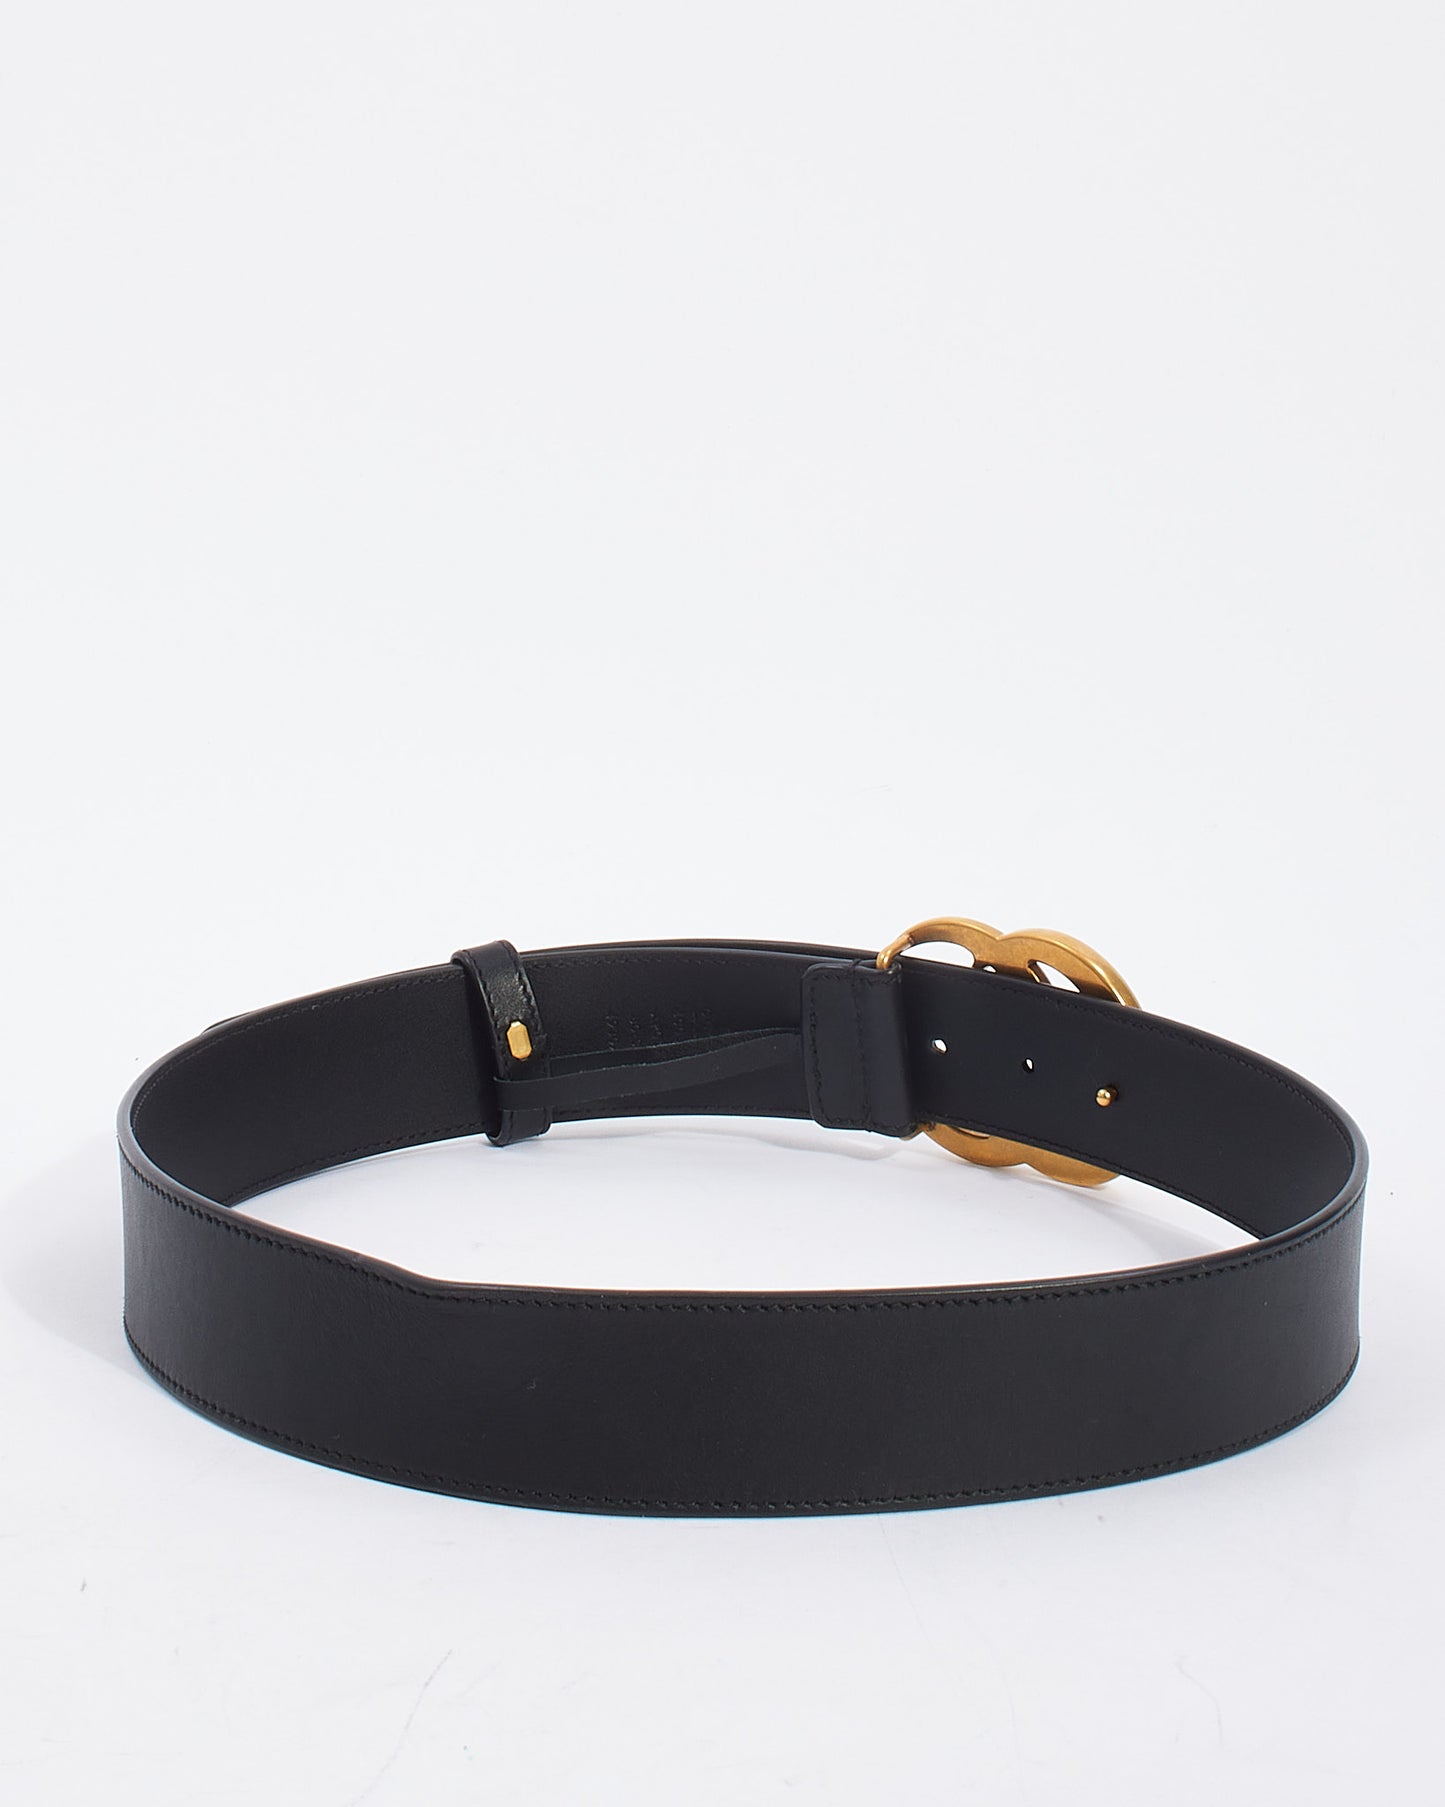 Gucci Black Leather Belt with Marmont Double G Buckle - 80/32